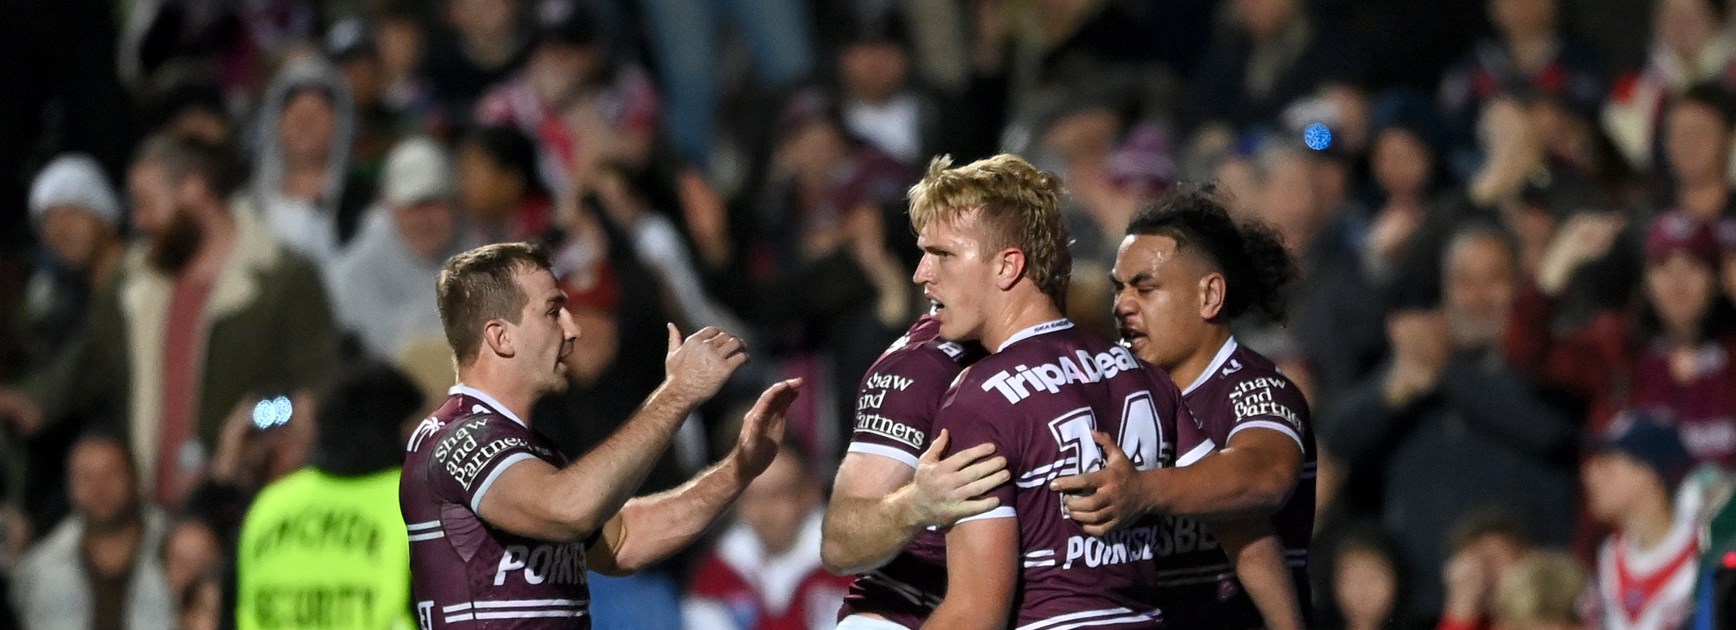 Sea Eagles show sheer grit in win over Roosters